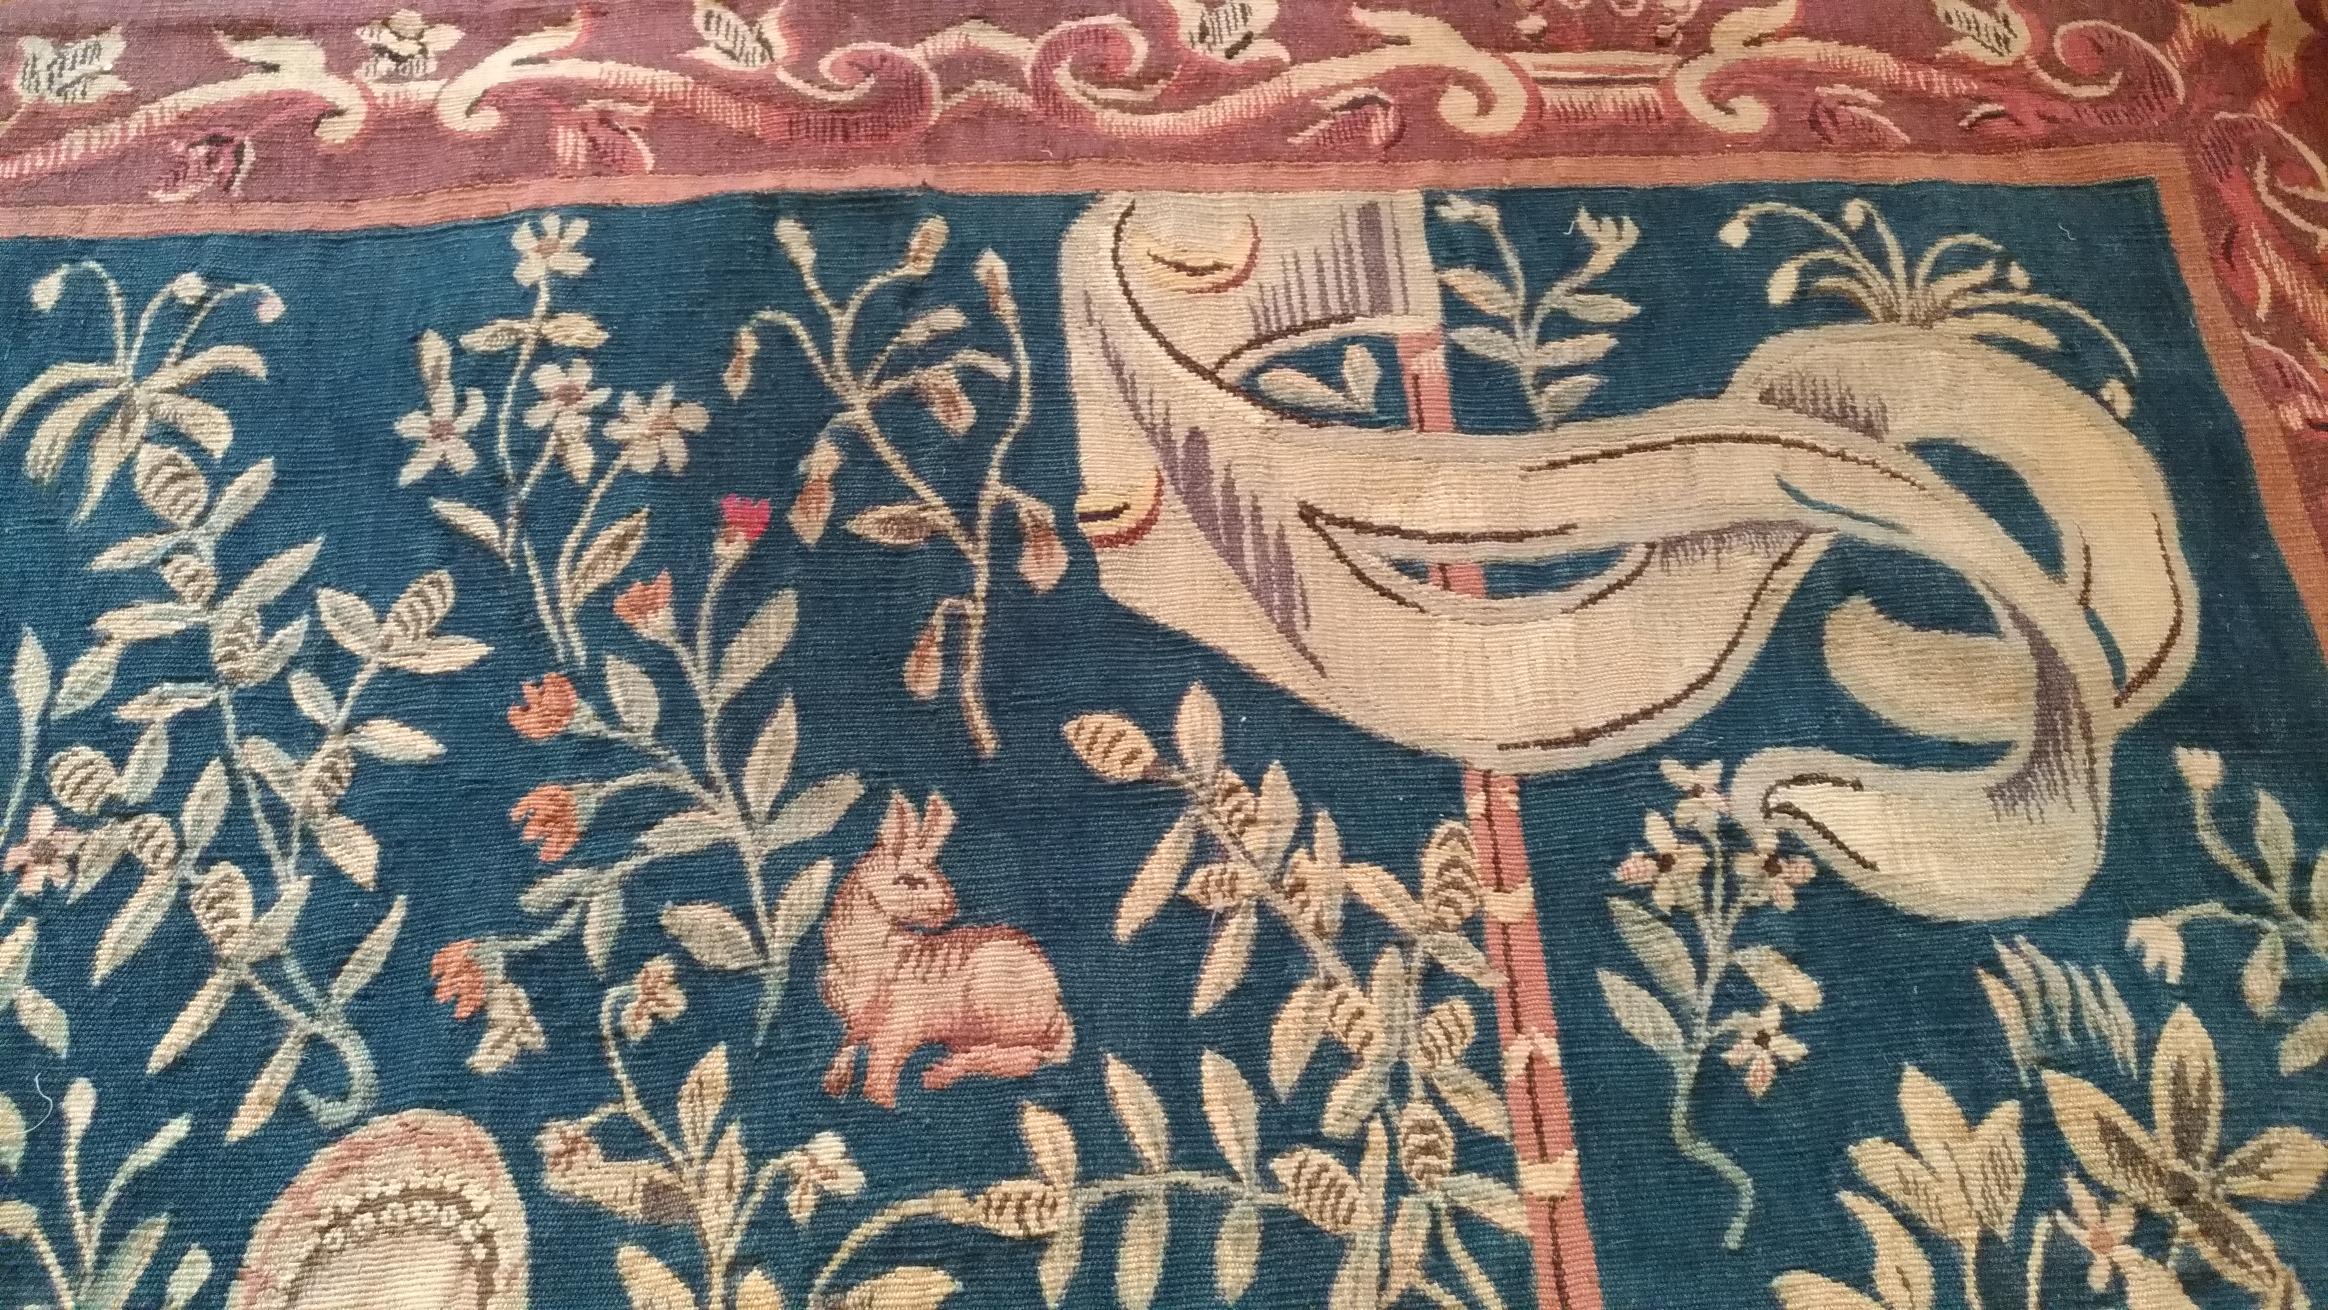  1107 - Aubusson Tapestry 19th Century Lady with the Unicorn  In Excellent Condition For Sale In Paris, FR